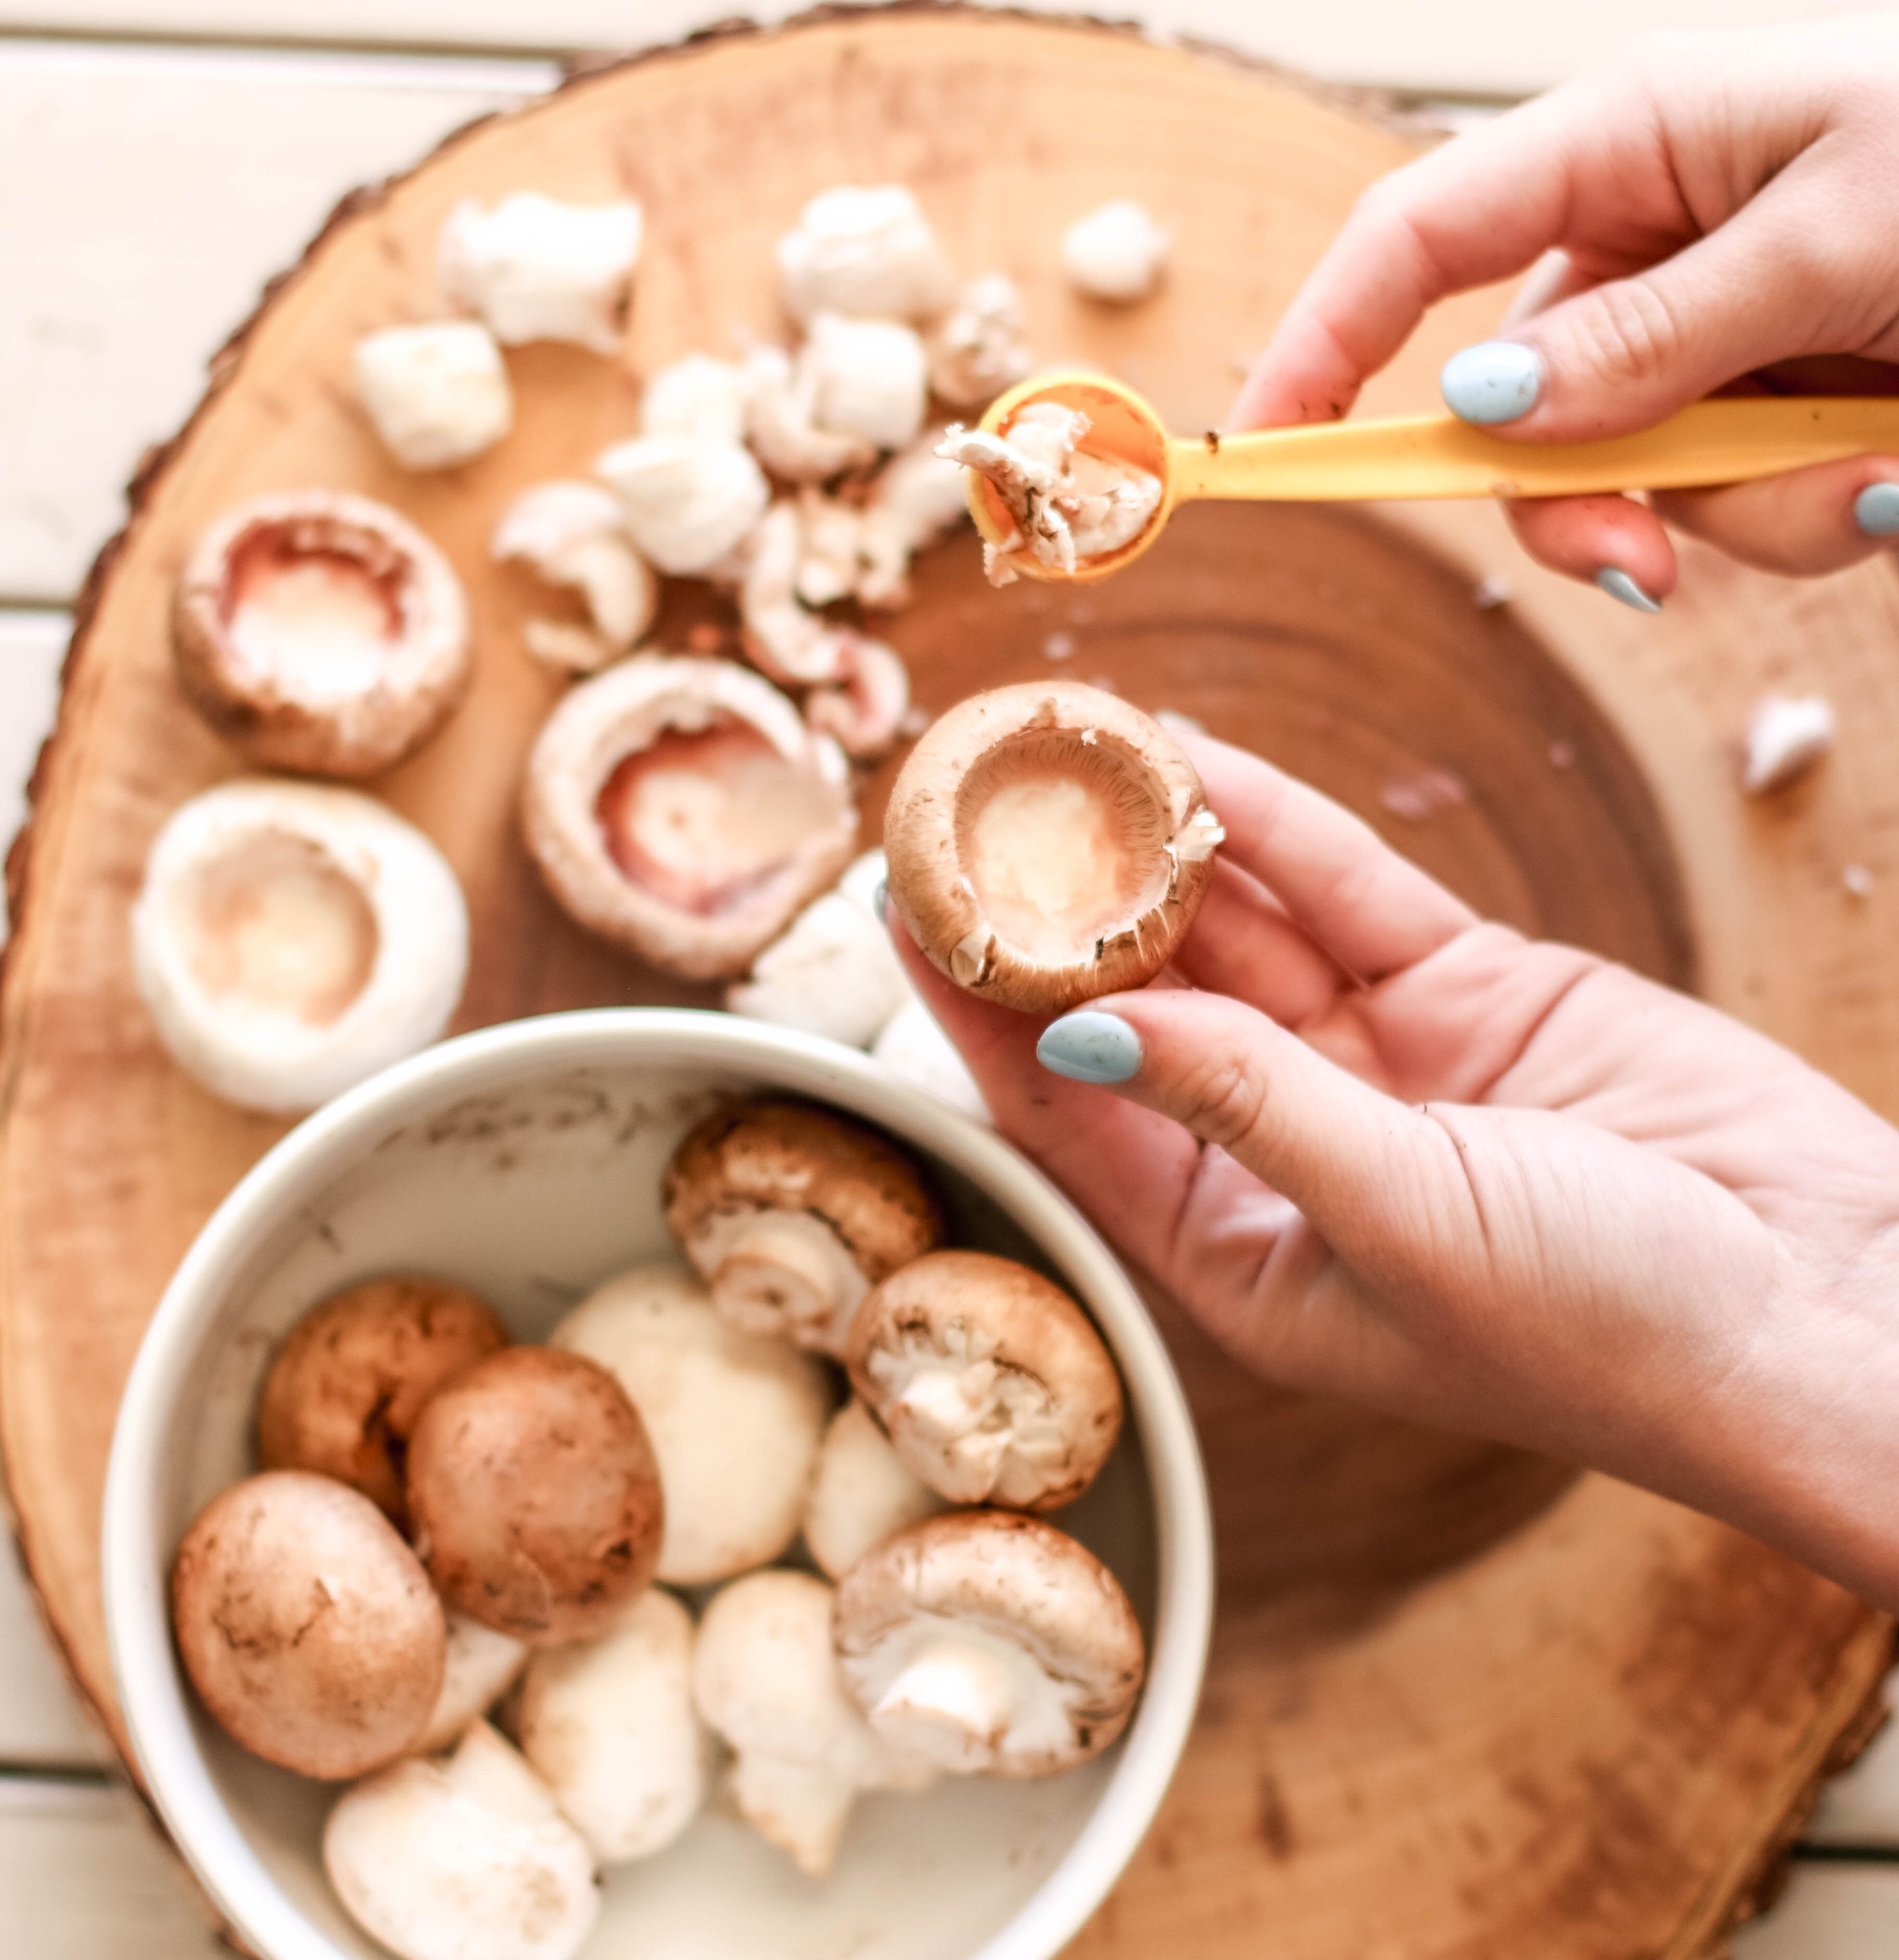 How to Clean Mushrooms & Prepare Them for Cooking